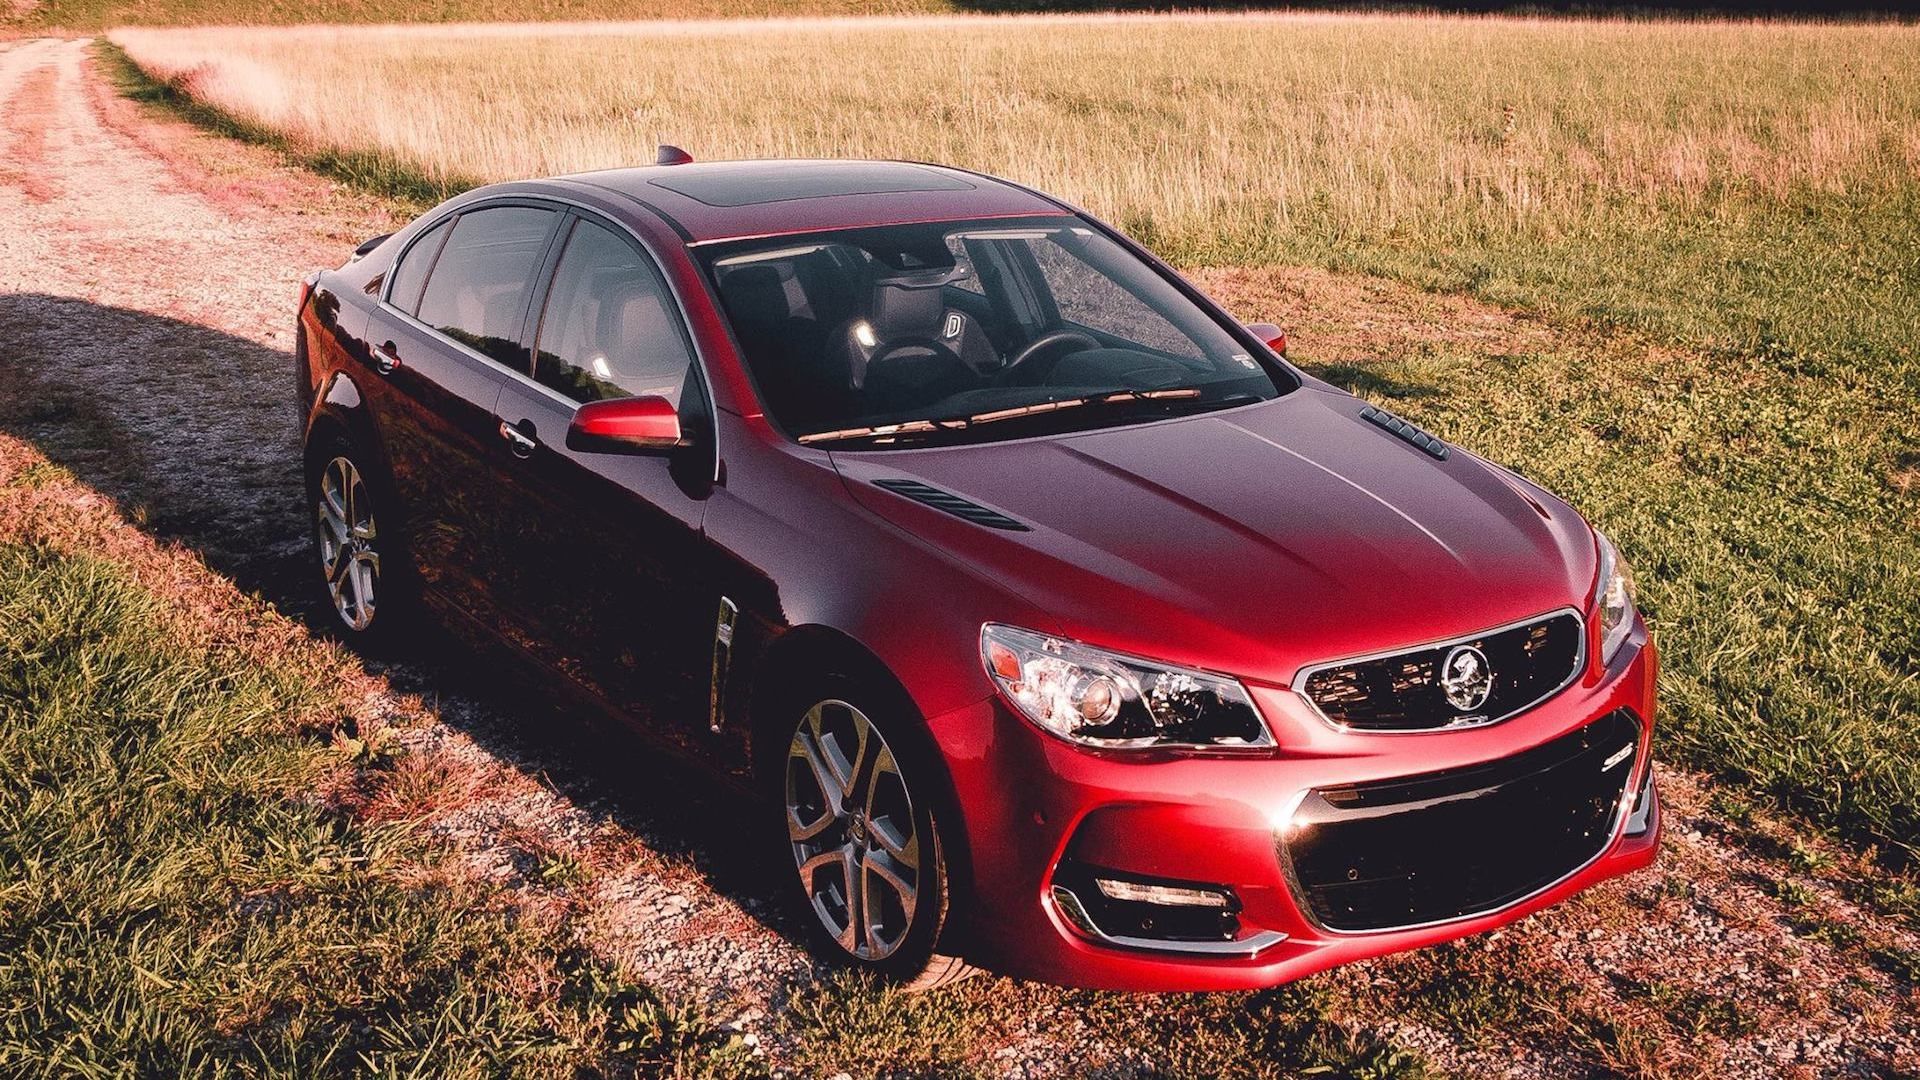 2016 Chevrolet SS Sports Sedan In Red, Parked On Grass